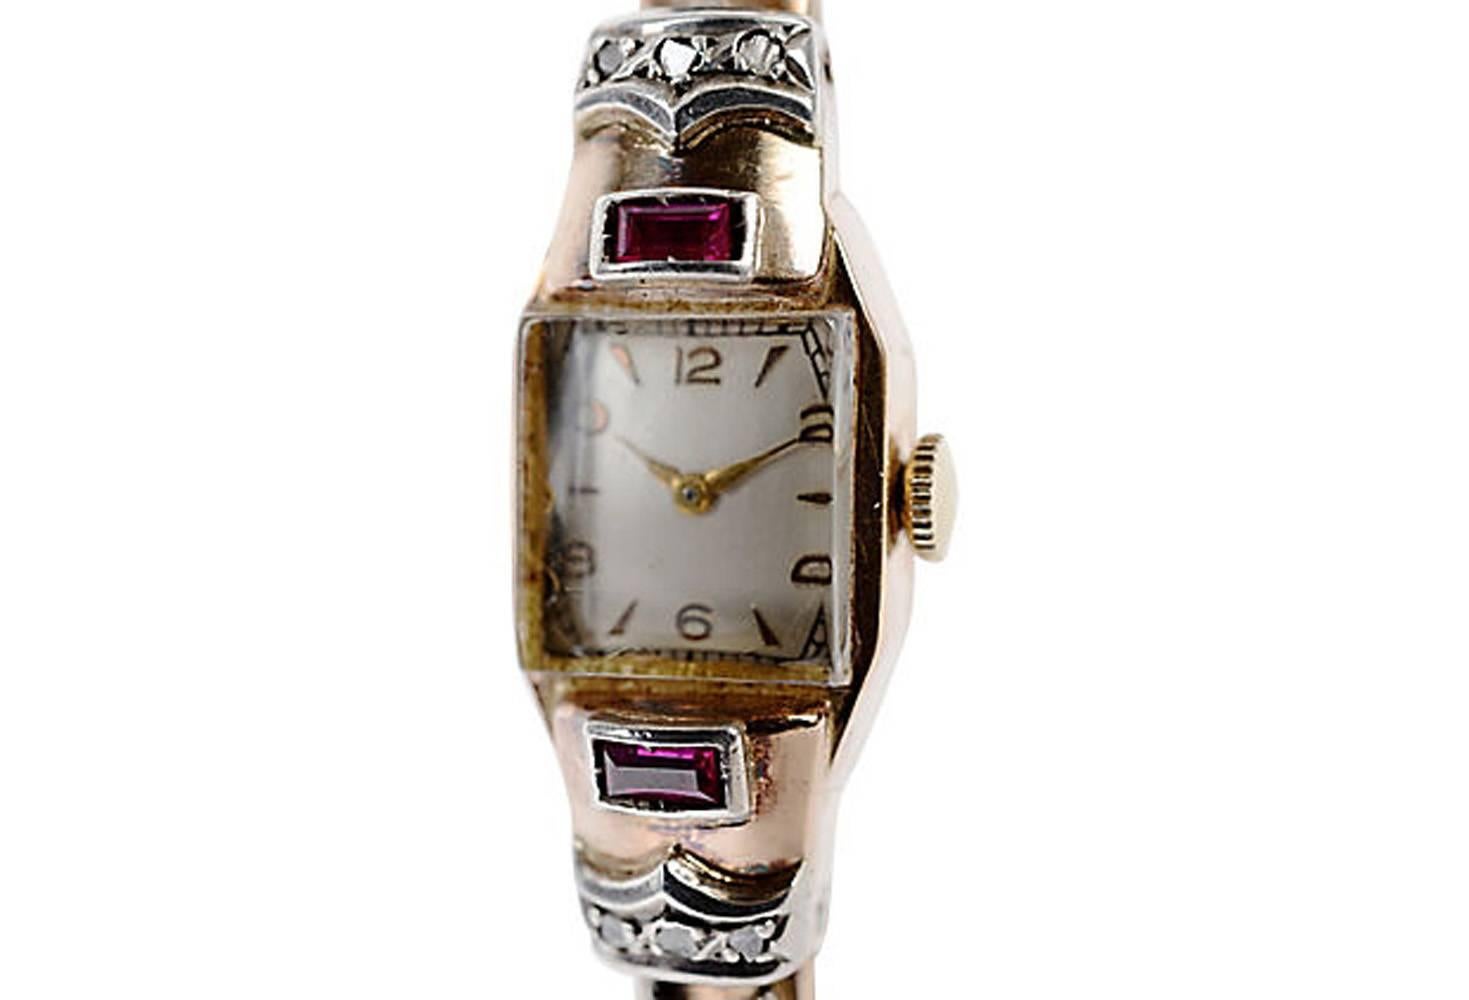 18K yellow gold ladies' watch featuring 14 single-cut diamonds and two rectangular rubies set in white gold. Marked: 18K. The bracelet is a spring-loaded cuff with a safety chain. The Swiss works are manual wind and marked 21 jewels. In running